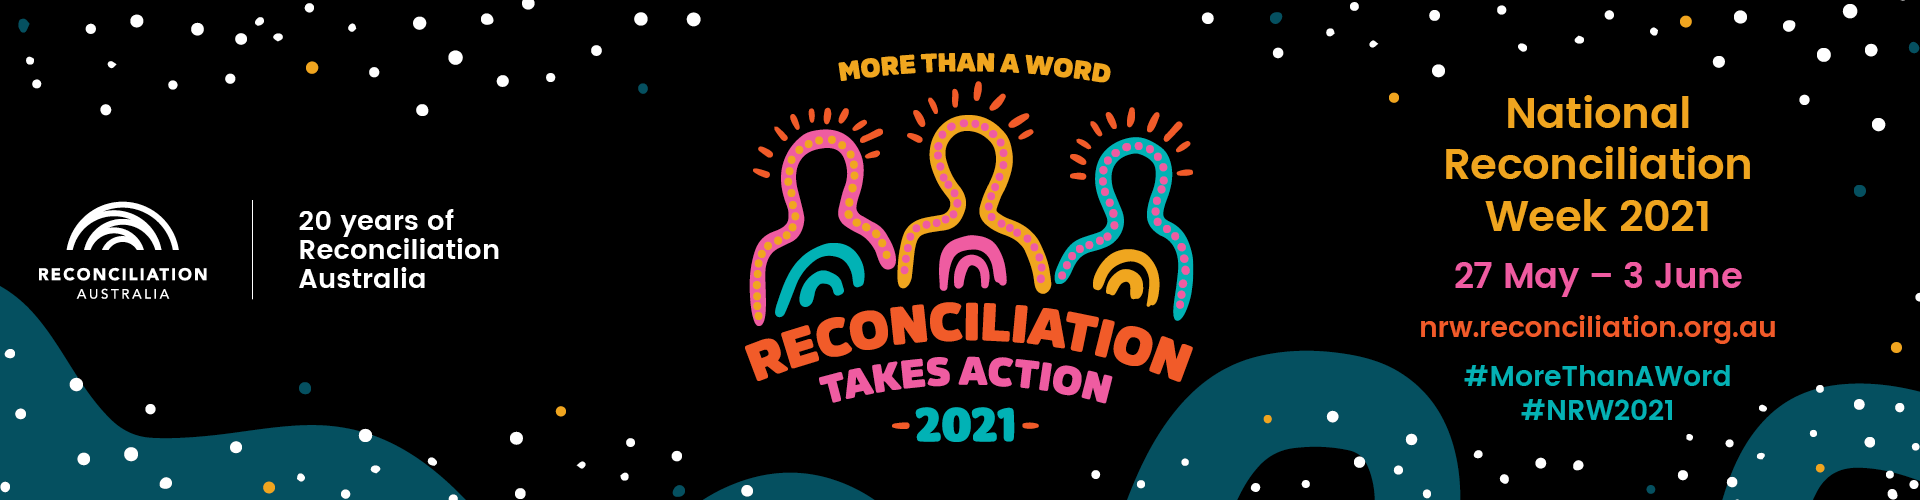 National Reconciliation Week 2021 banner